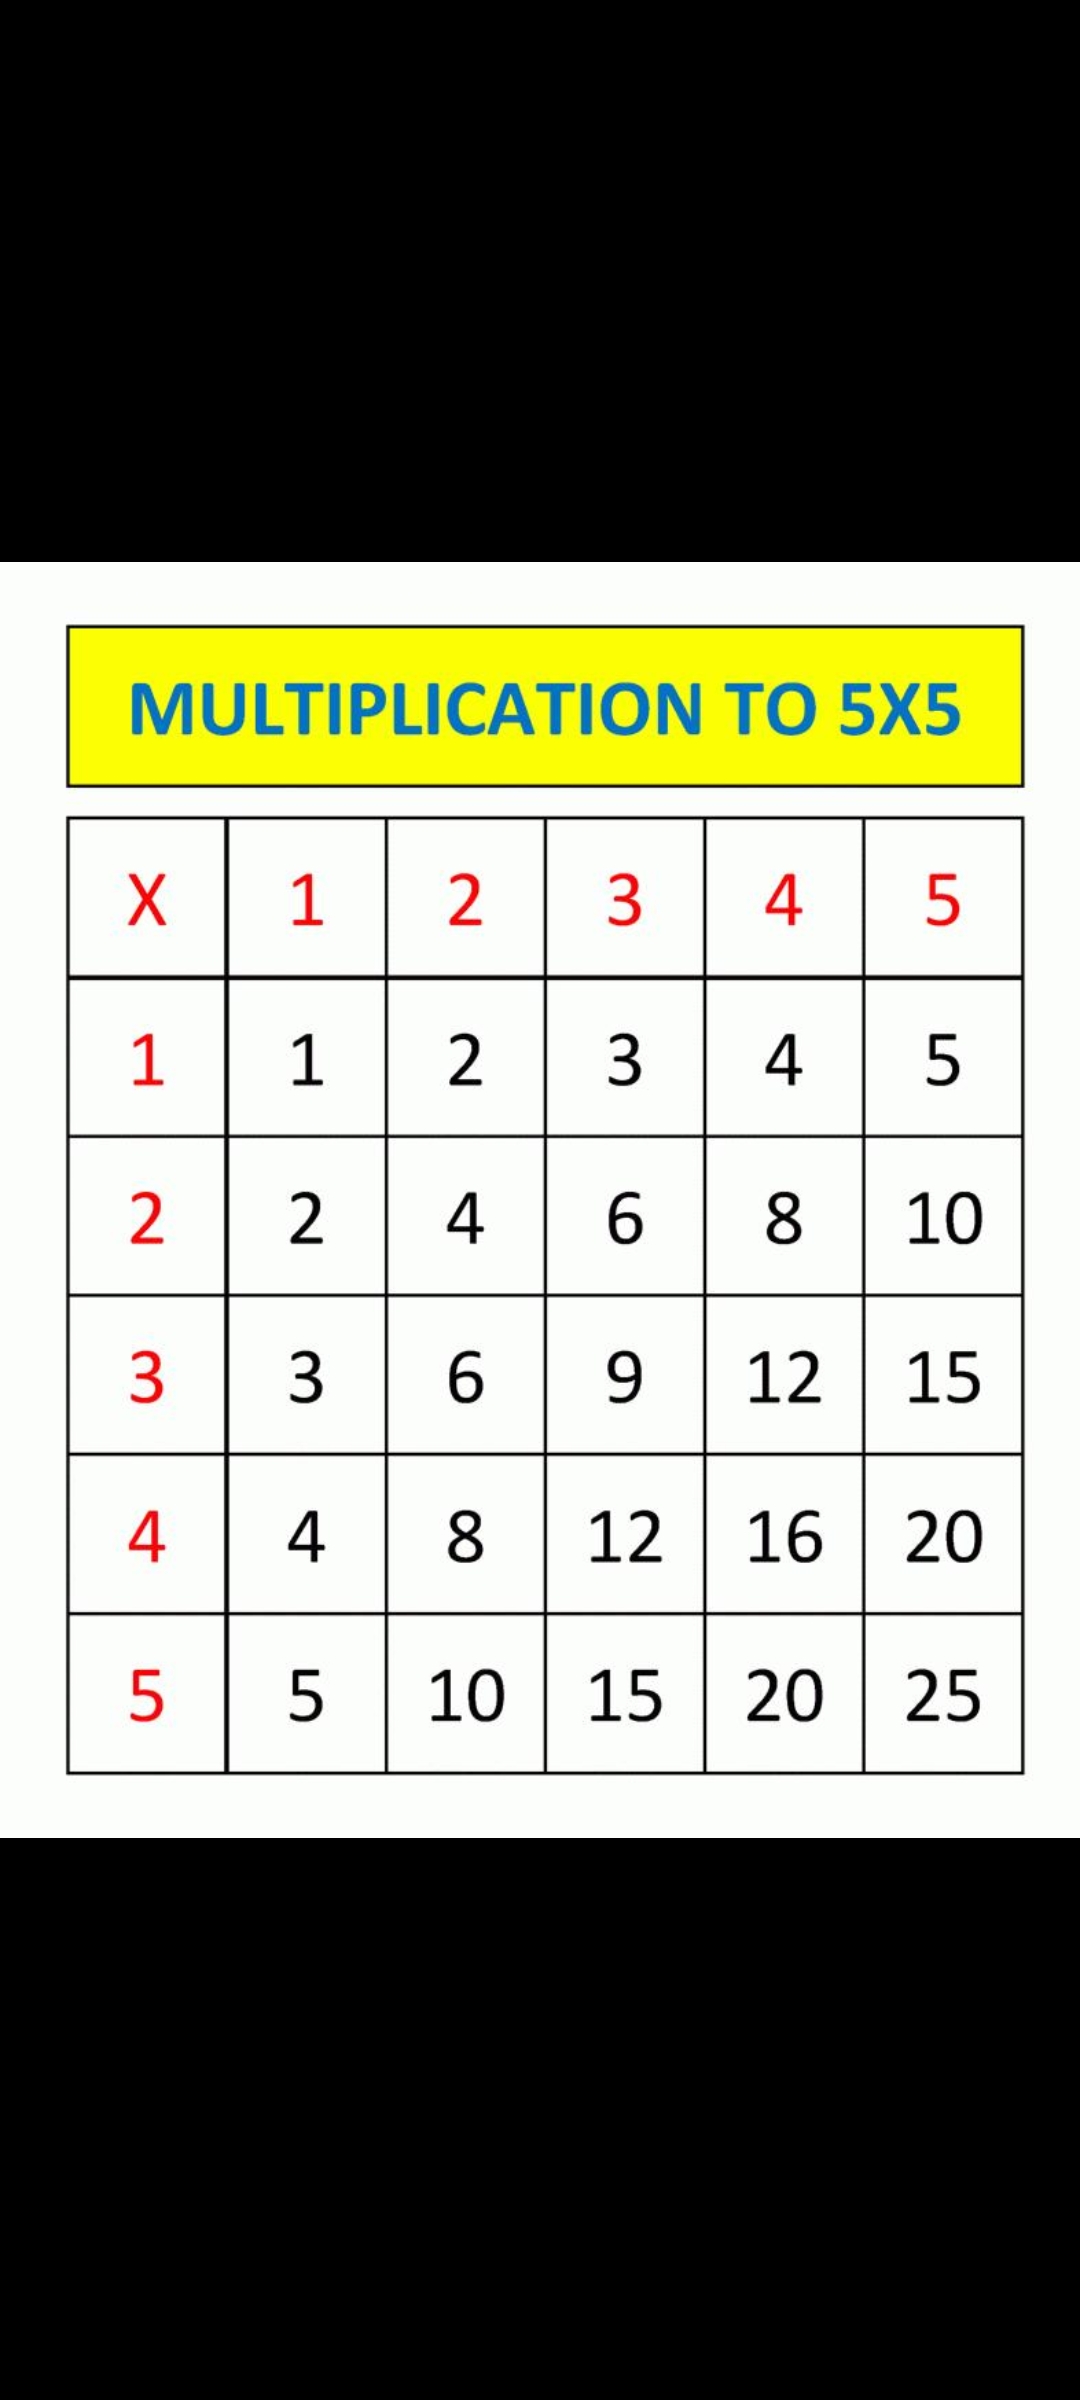 MULTIPLICATION TO 5X5
1 2 3 4 5
1 1 2 3 4 5
2 2 10
4 6 8
3 3 6 9 12 15
4 |
4 8 12 16 20
5
5
10 | 15 | 20 25
